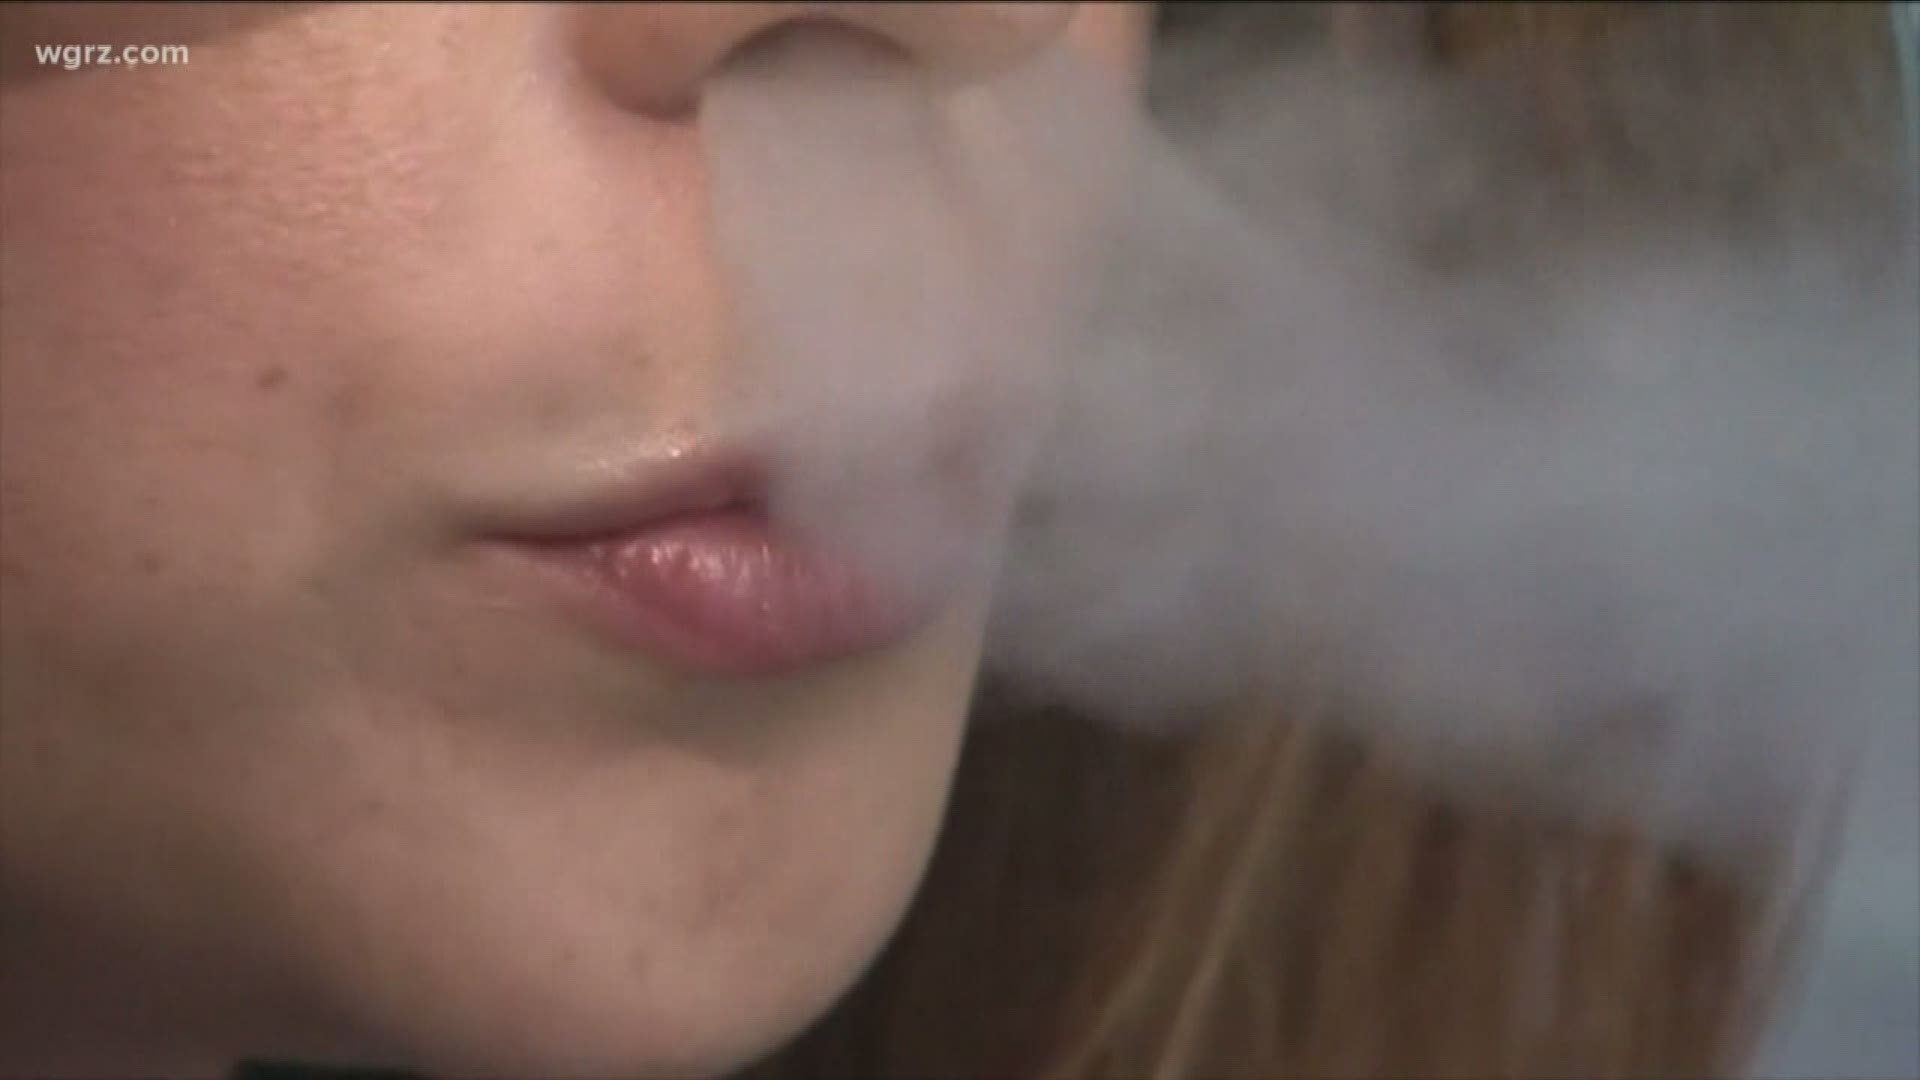 Federal flavored E-Cigarette ban is in the works. There have been more than 450 cases nationwide including 13 here in Western New York.